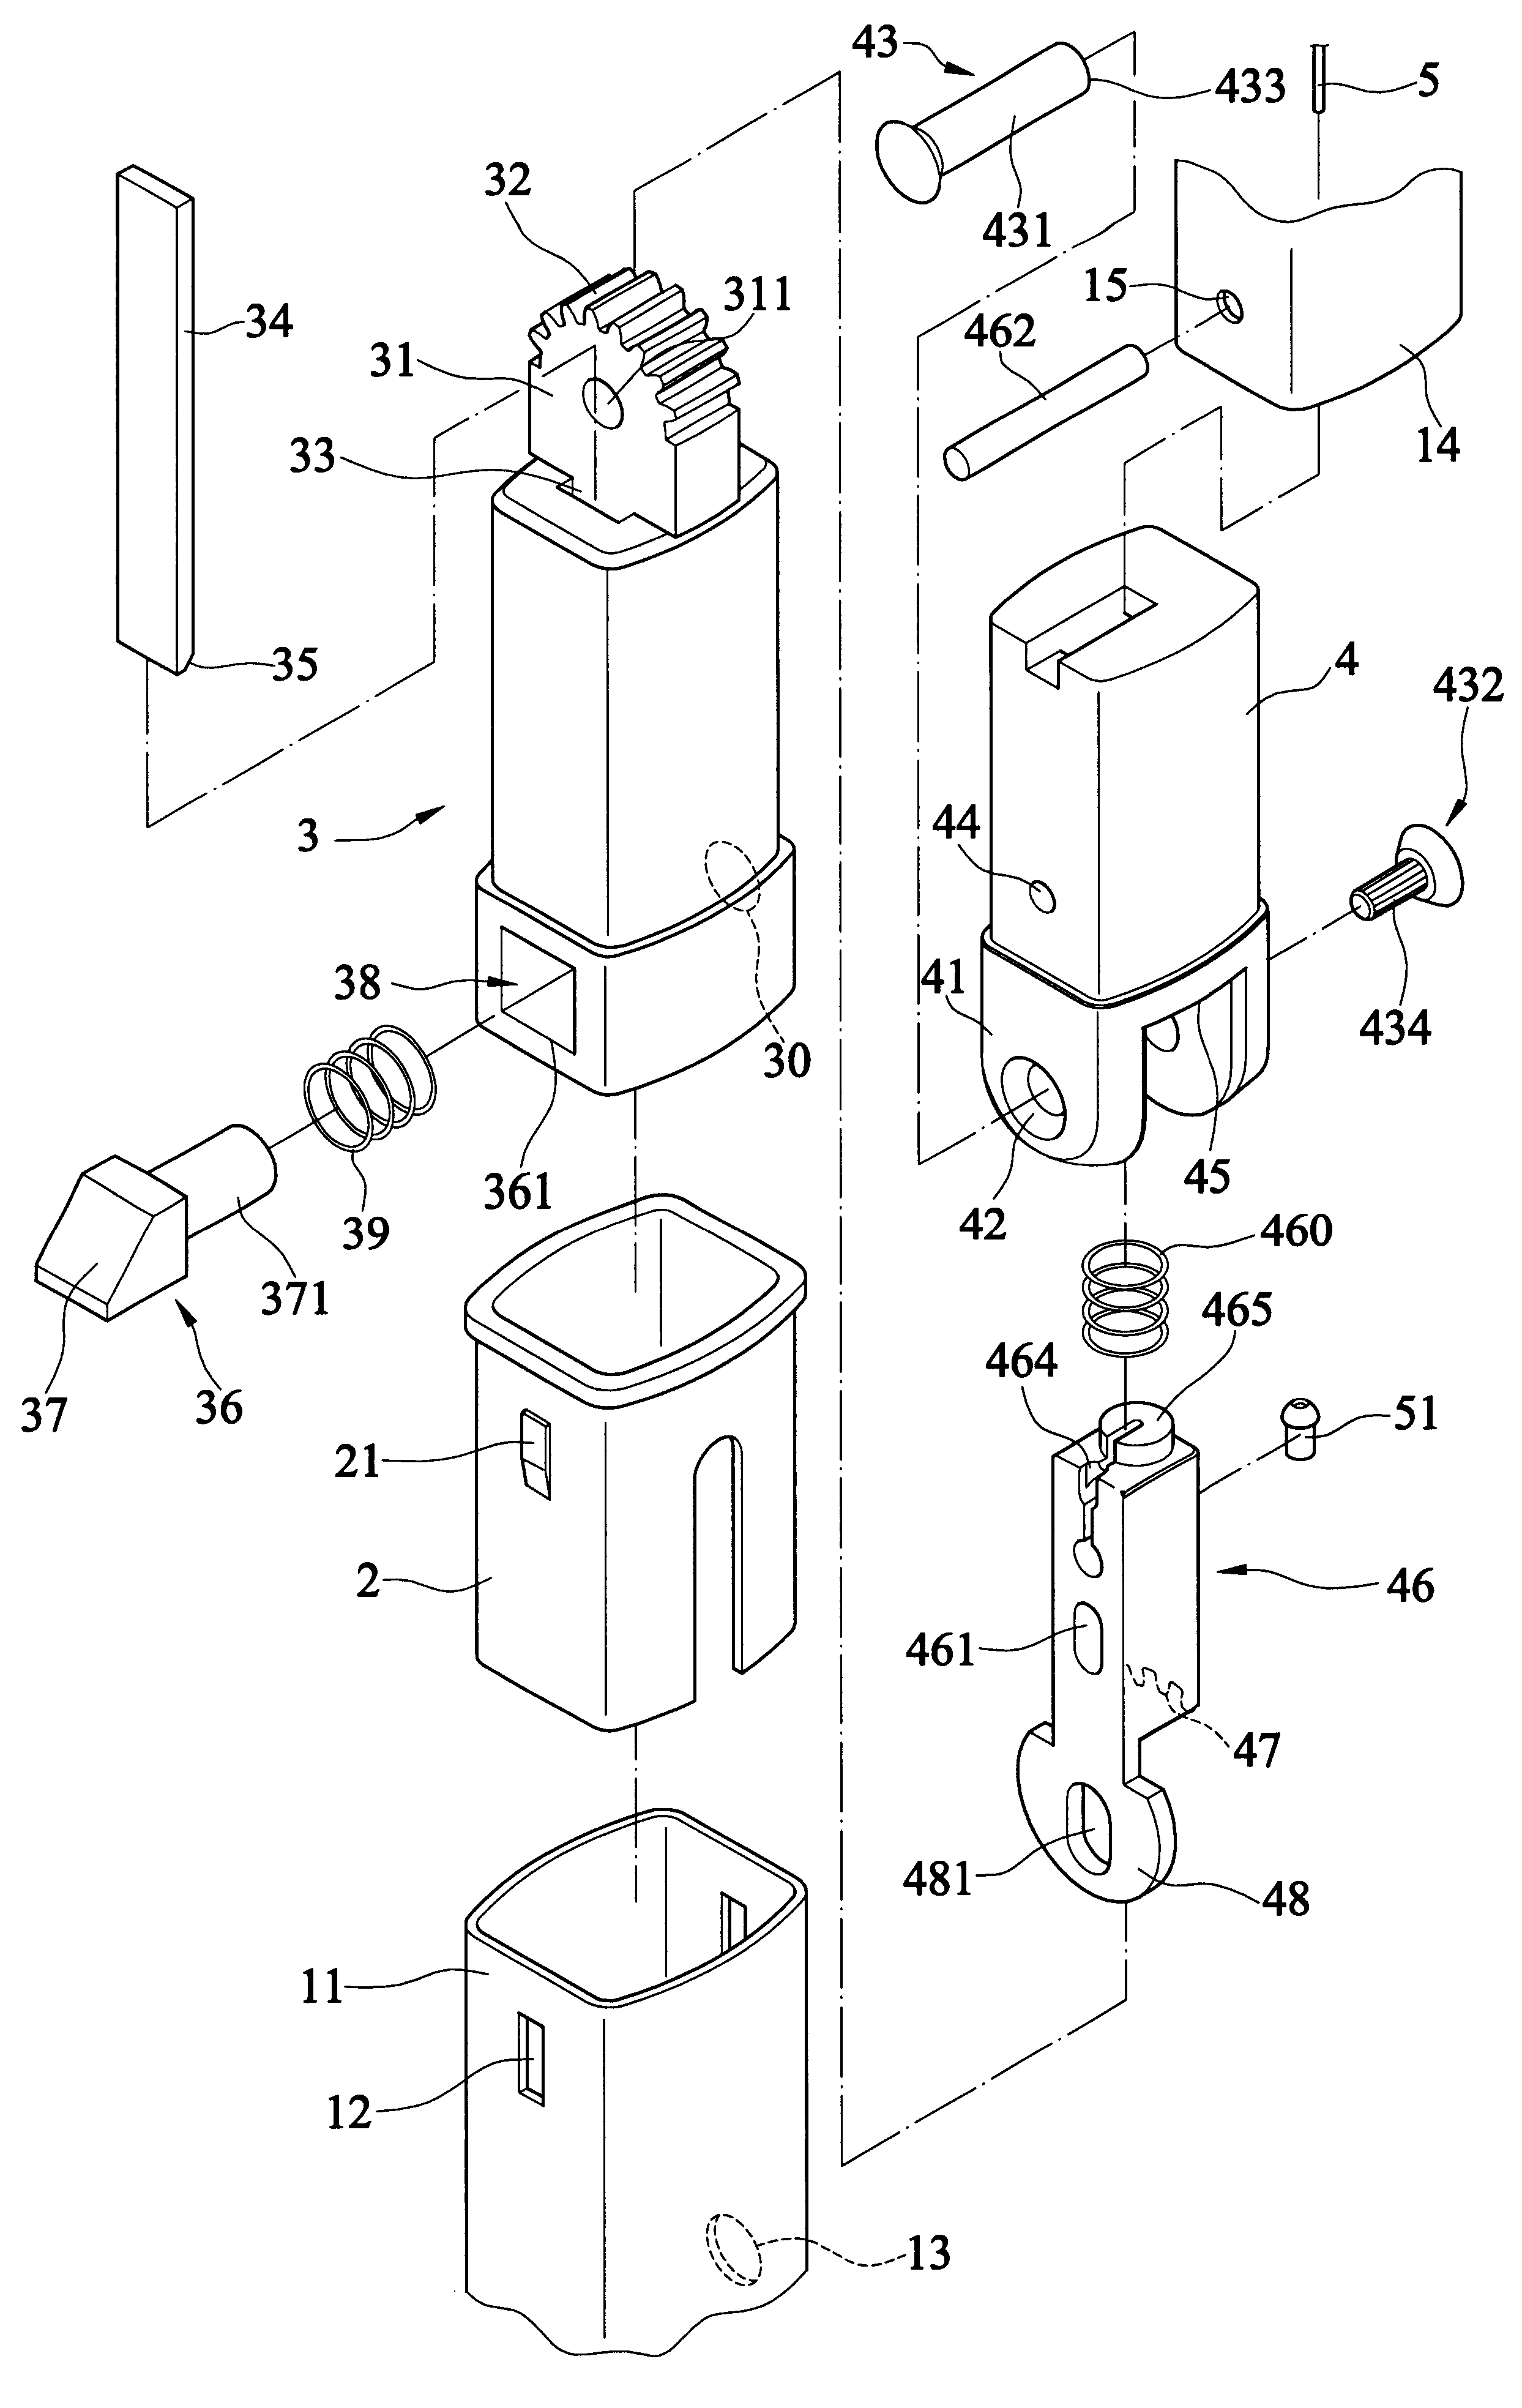 Swivel draw bar structure of a suitcase